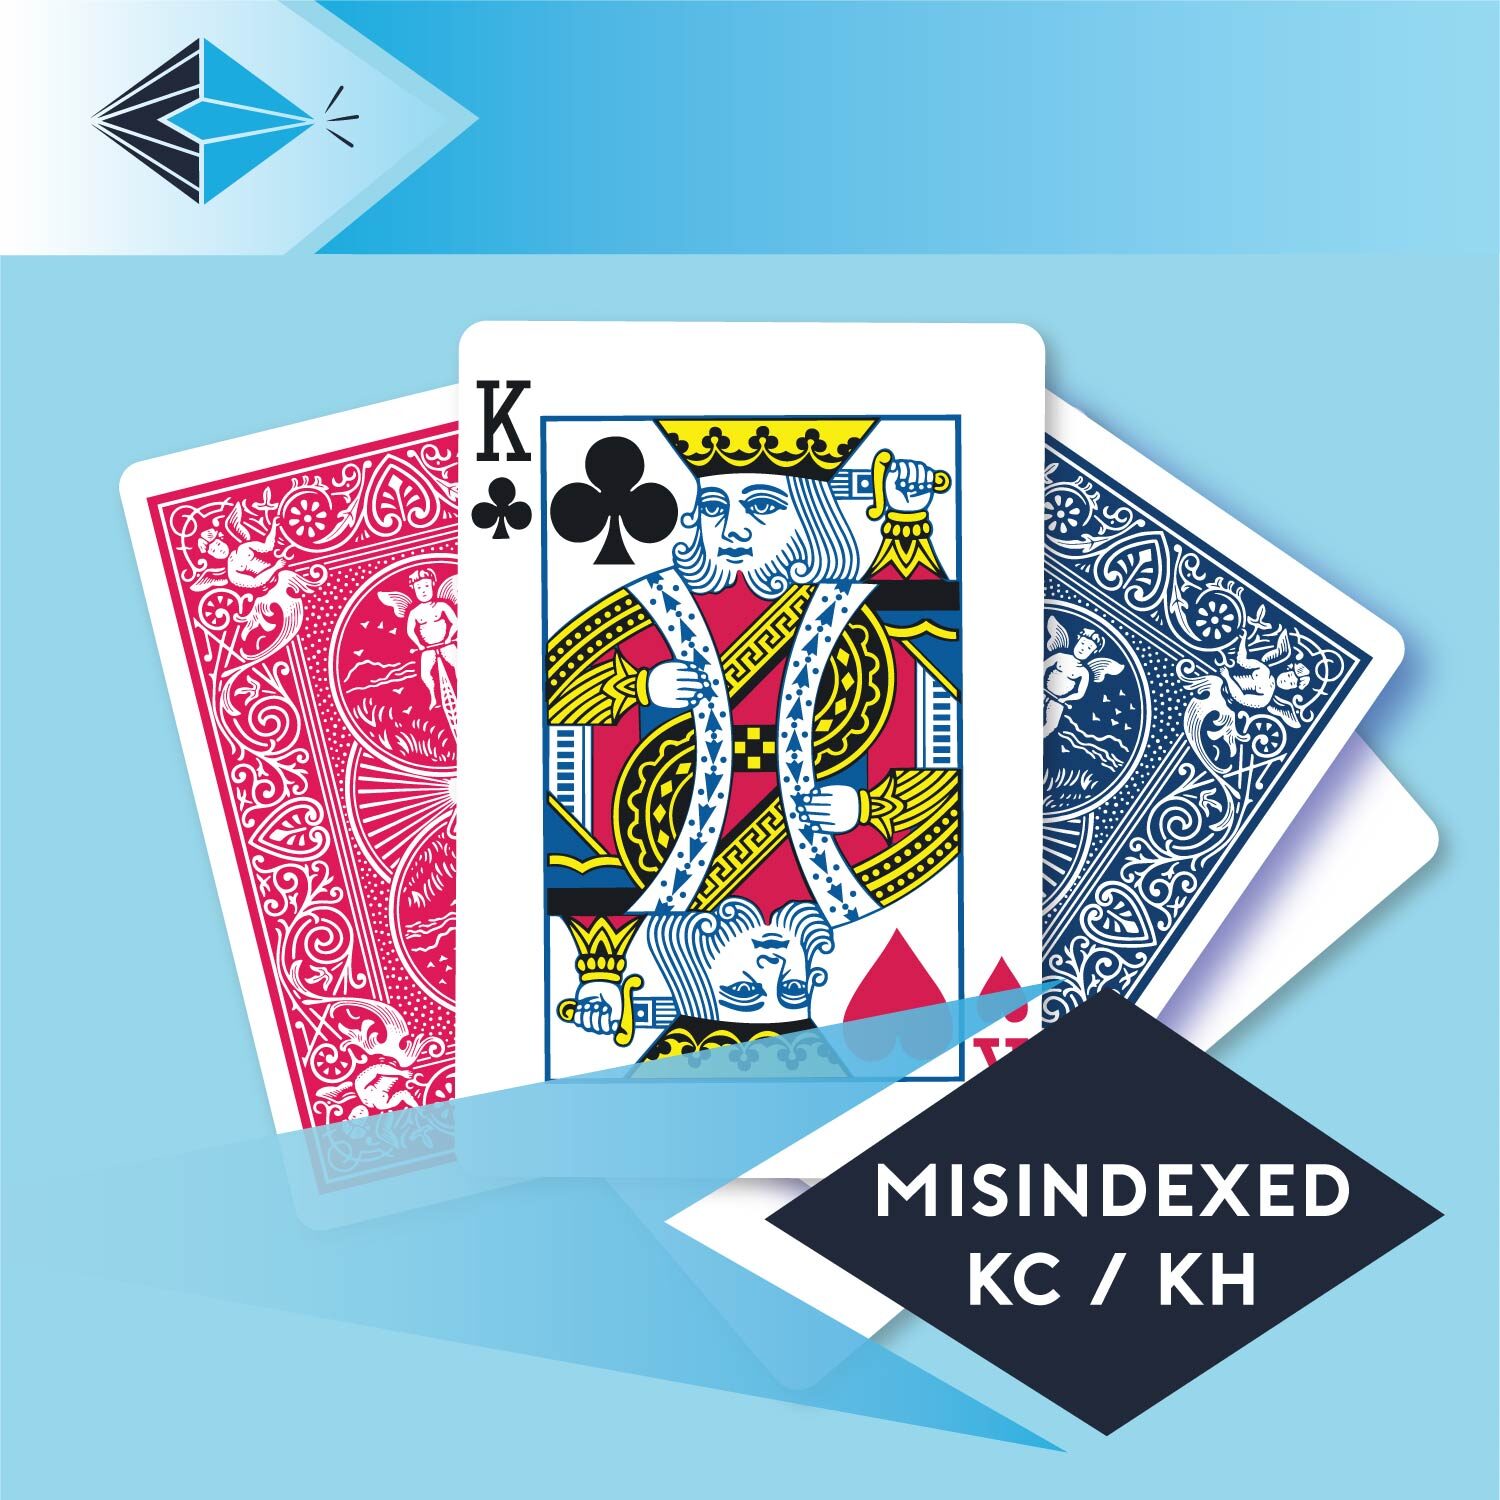 mis-indexed-king-clubs-hearts-kc-kh-playing card for magicians printing printers Stockport Manchester UK